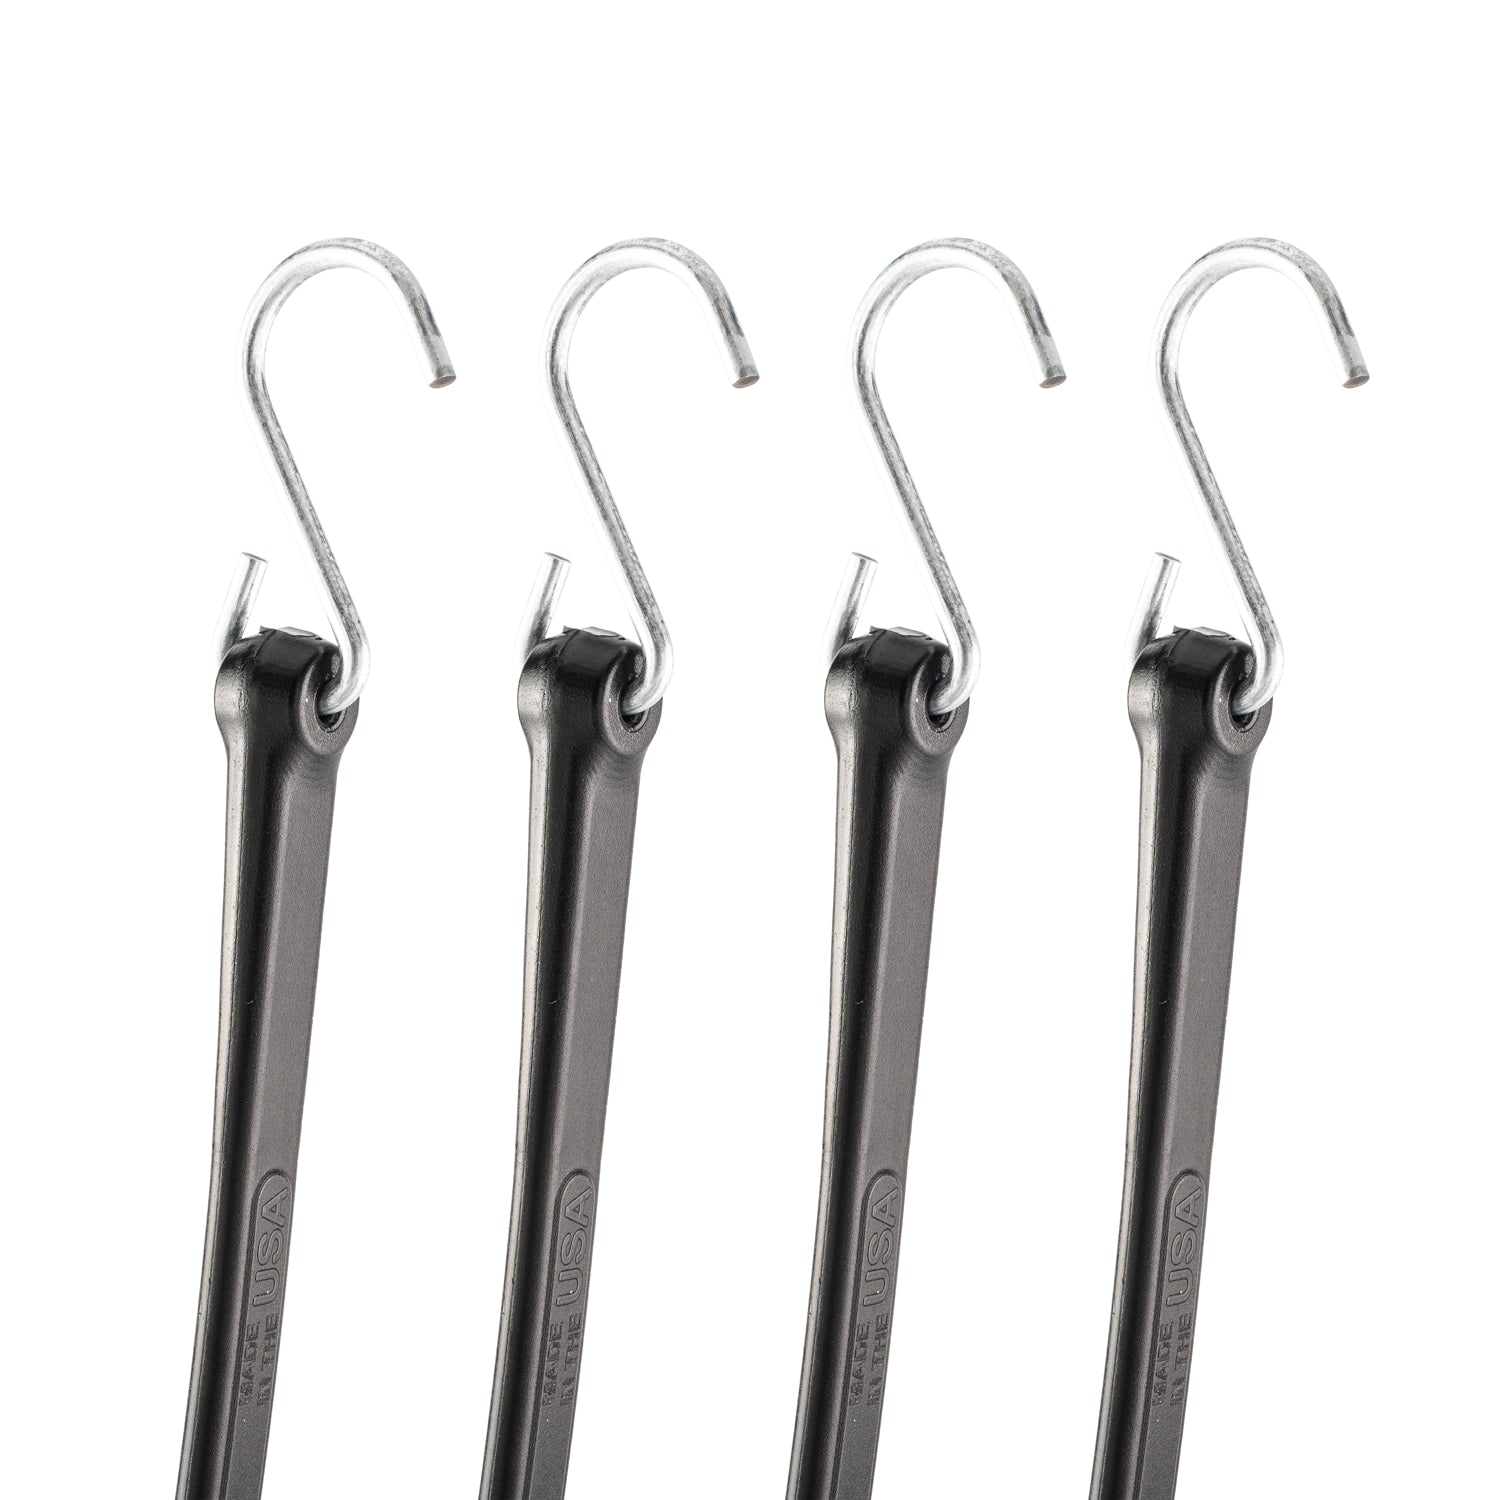 36" Heavy Duty Bungee Strap 4 Pack - The Perfect Bungee & ShockStrap Tie Downs